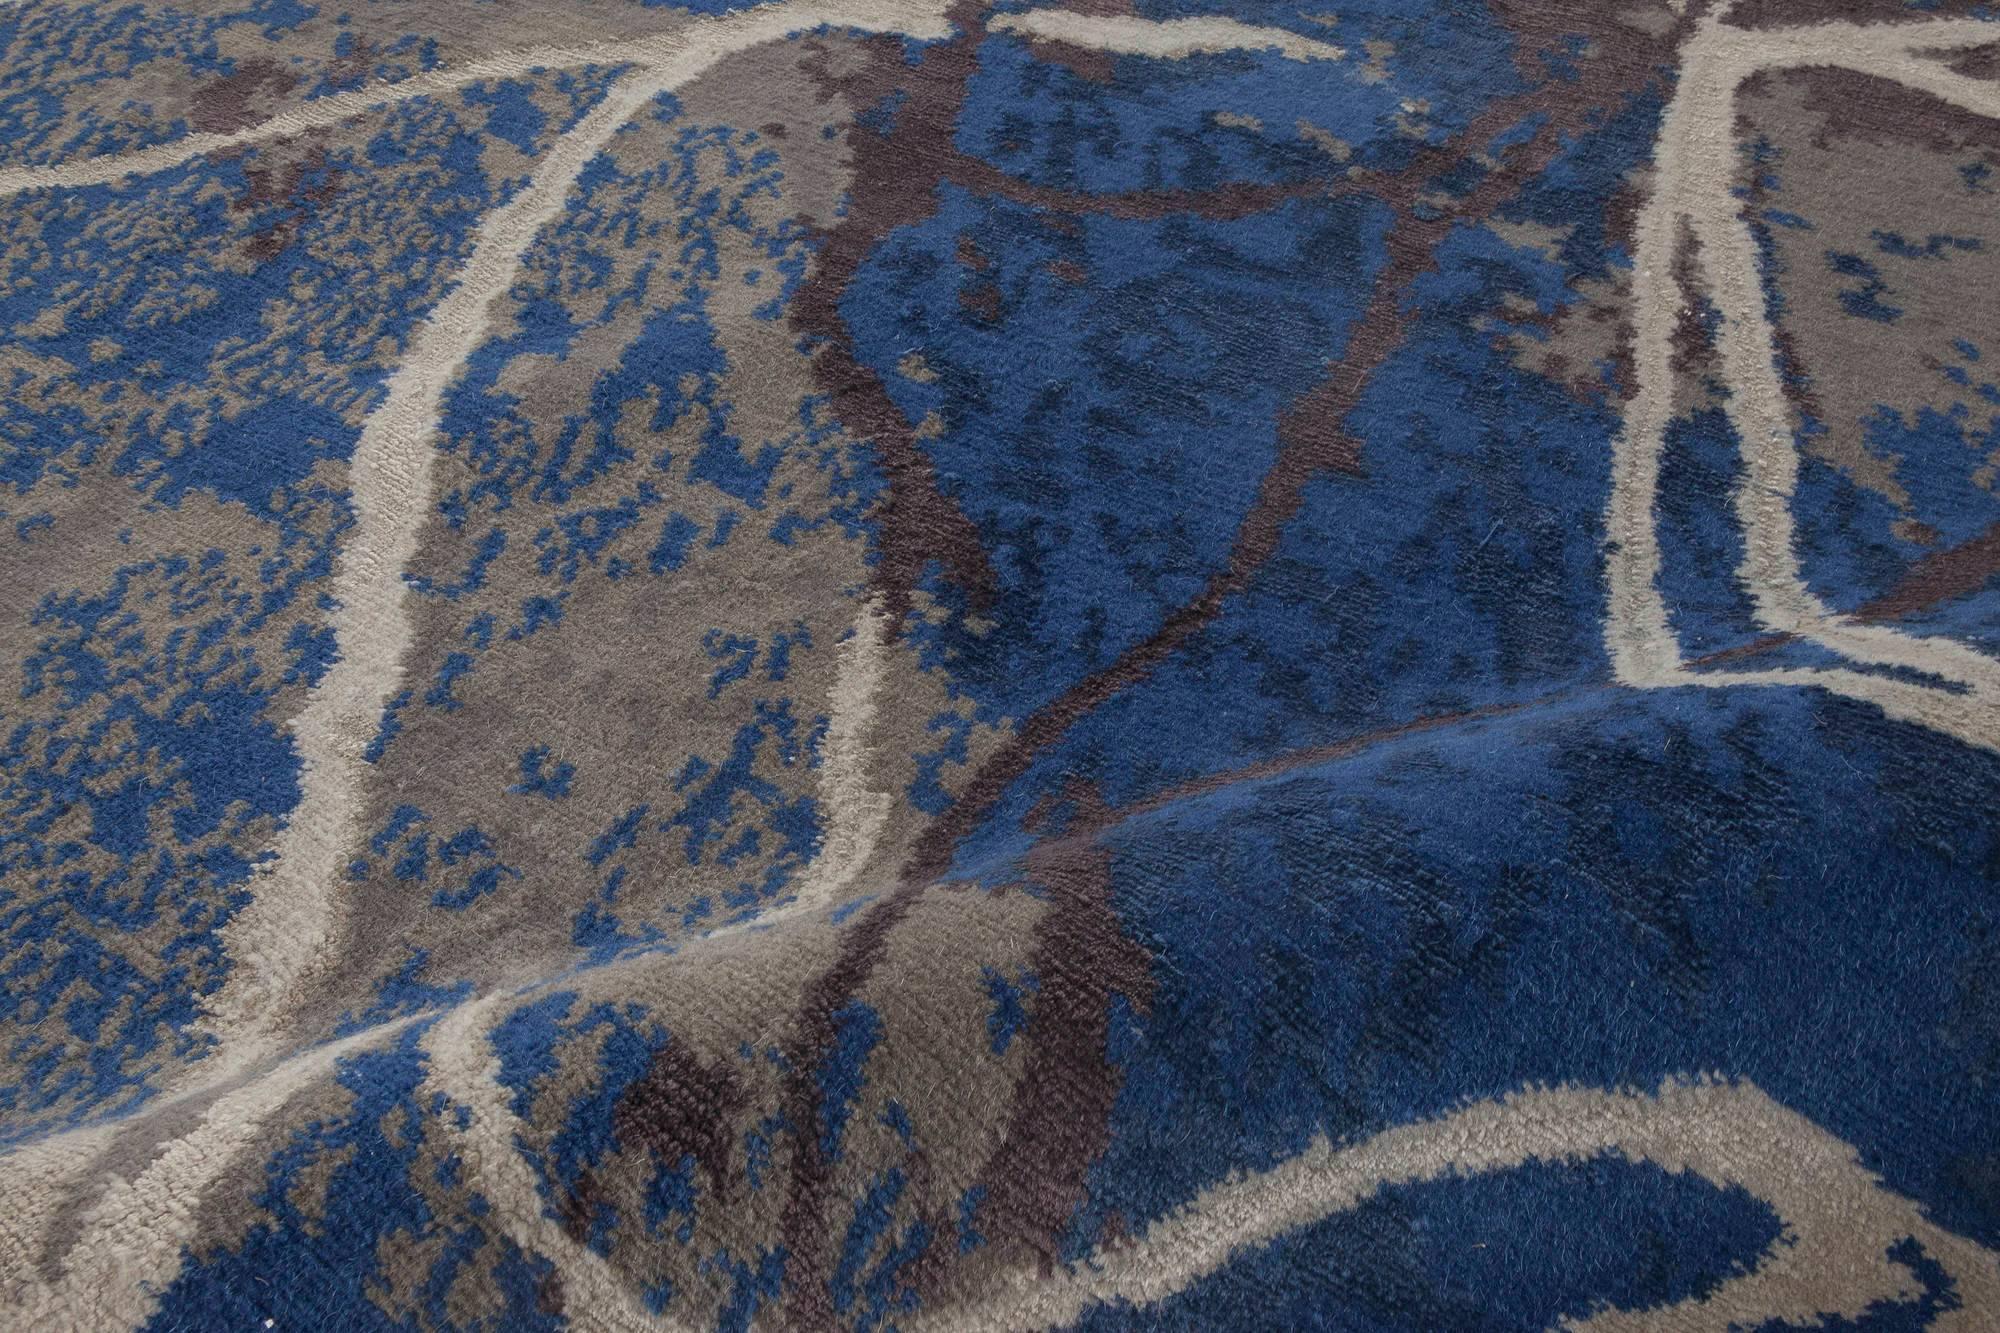 Contemporary indigo and brown hand-spun wool and silk rug by Doris Leslie Blau.
Size: 13.0